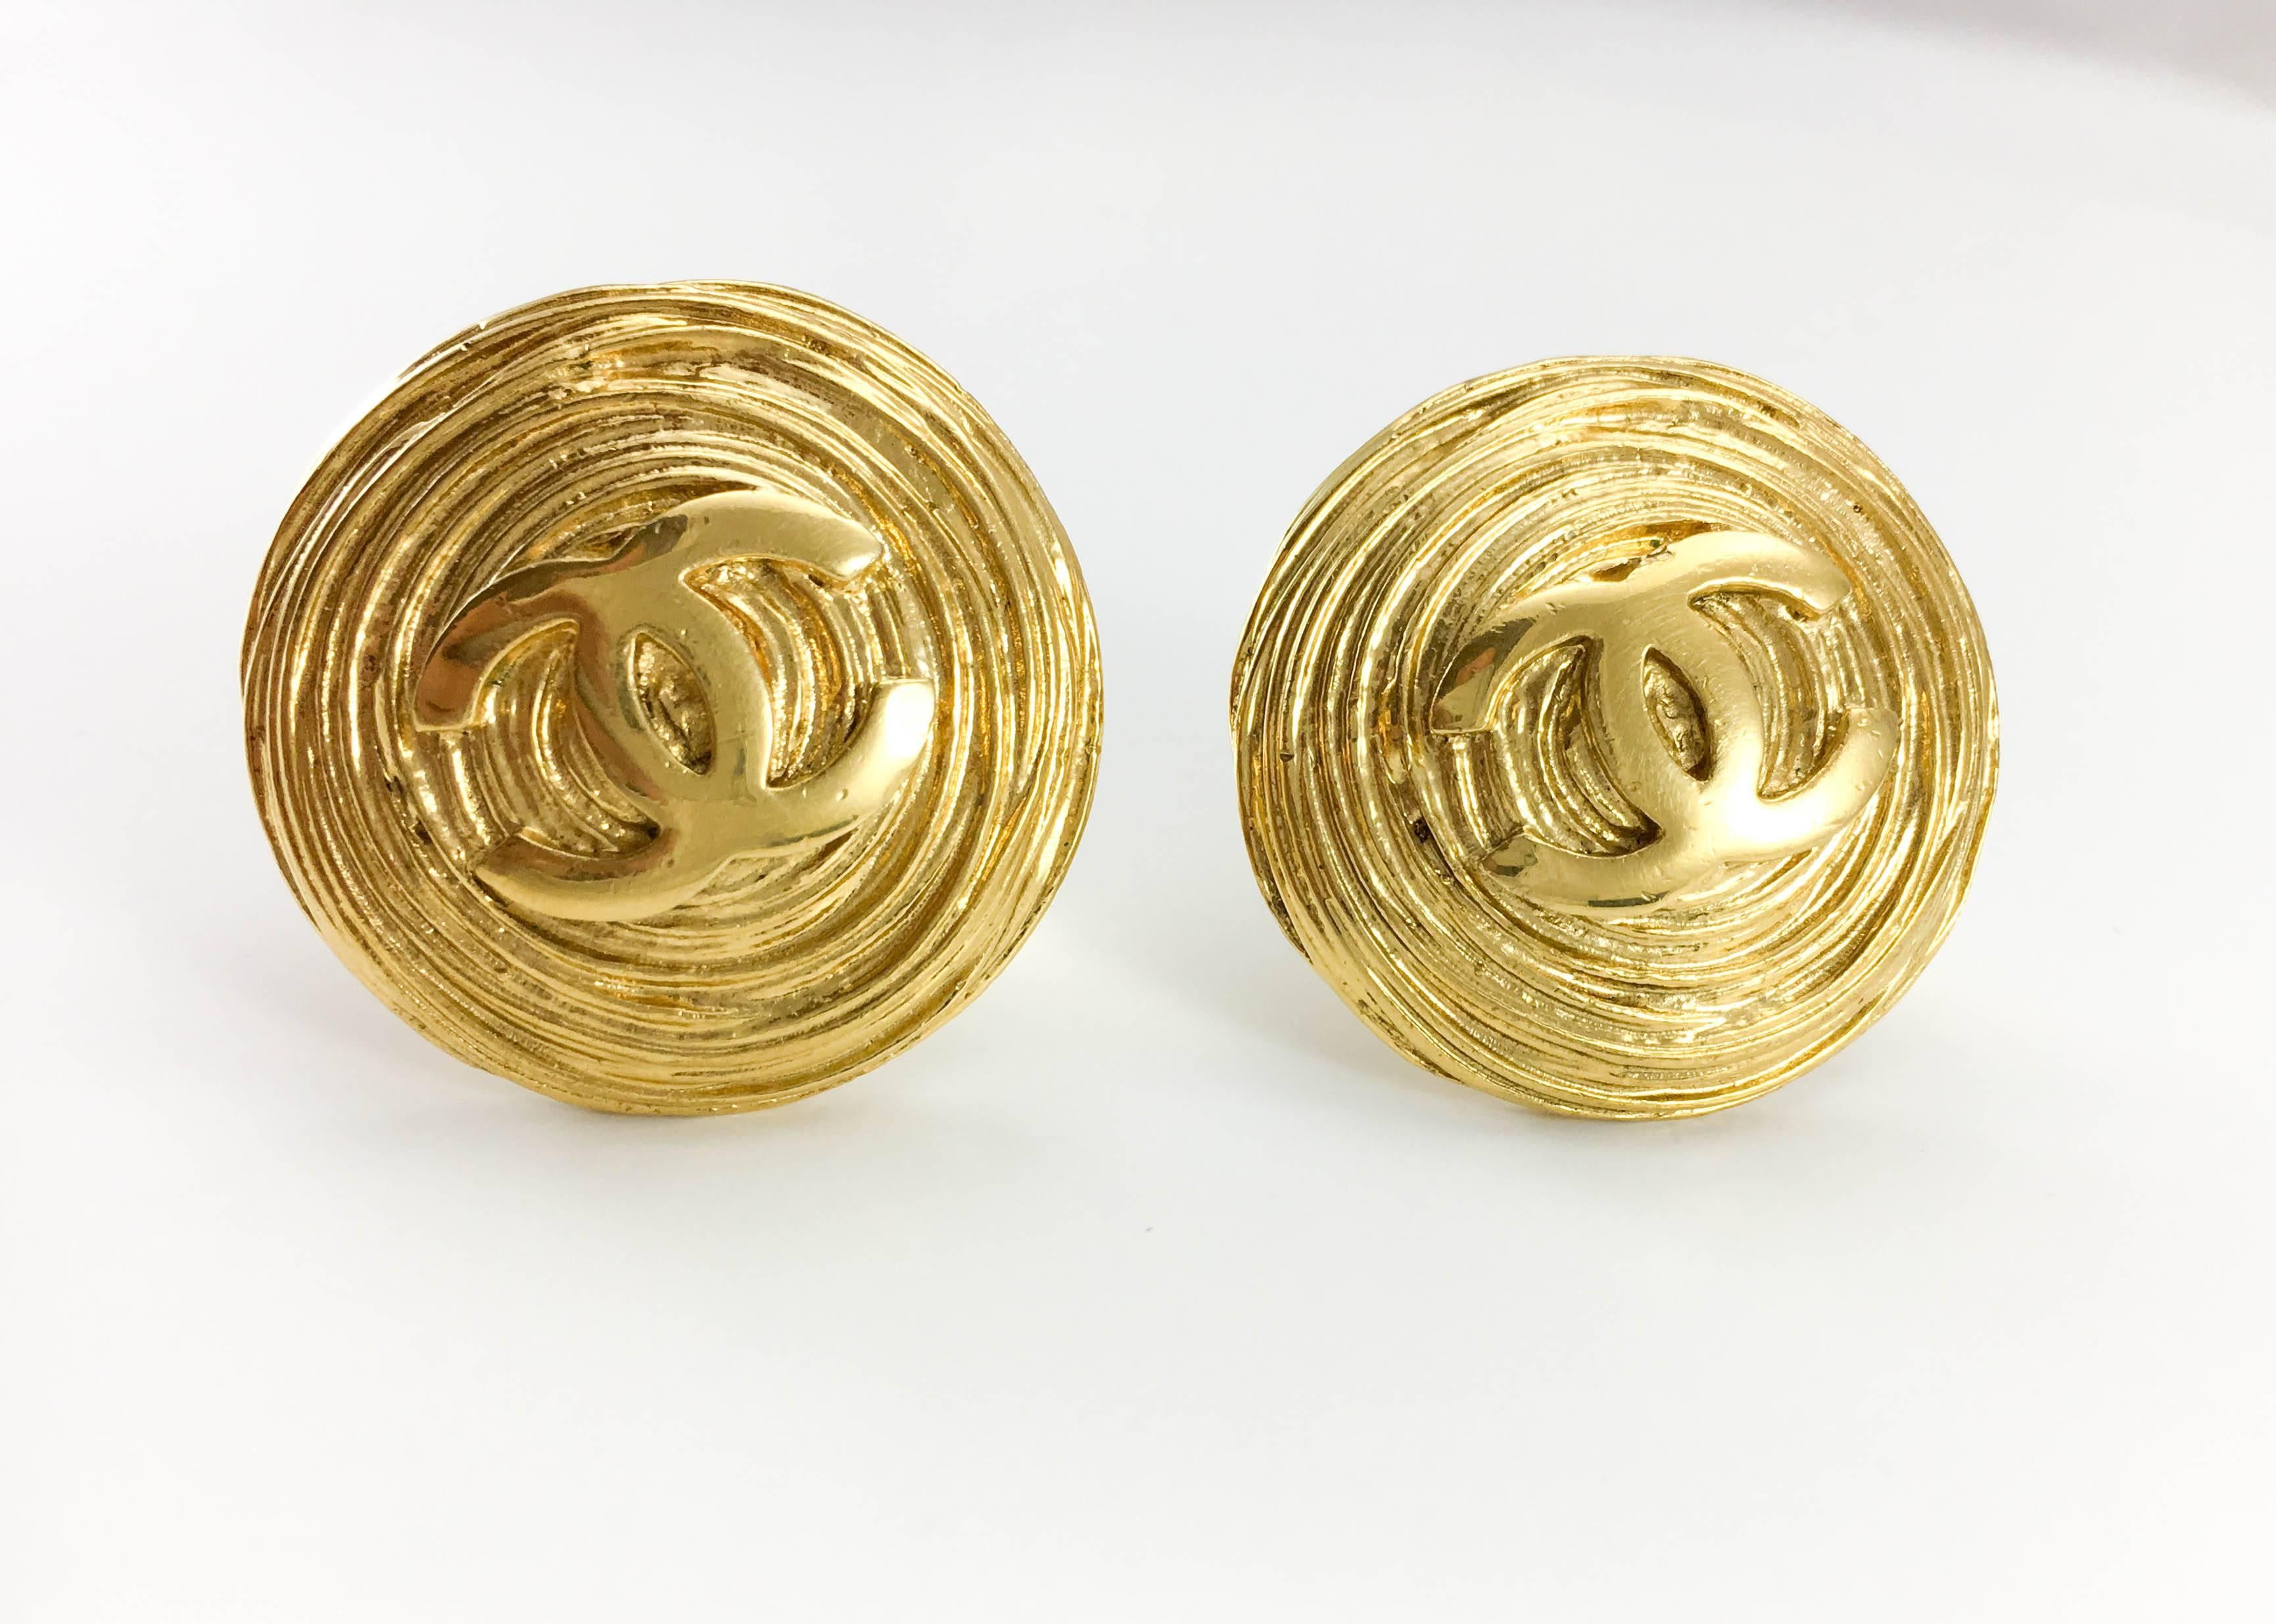 Vintage Chanel Gold-Plated Logo Clip-On Earrings. These amazing looking earrings by Chanel were made in 1988 (collection 25). Designed by super jewelry designer Victoire de Castellane, it brings her dramatic high-fashion signature. They feature deep